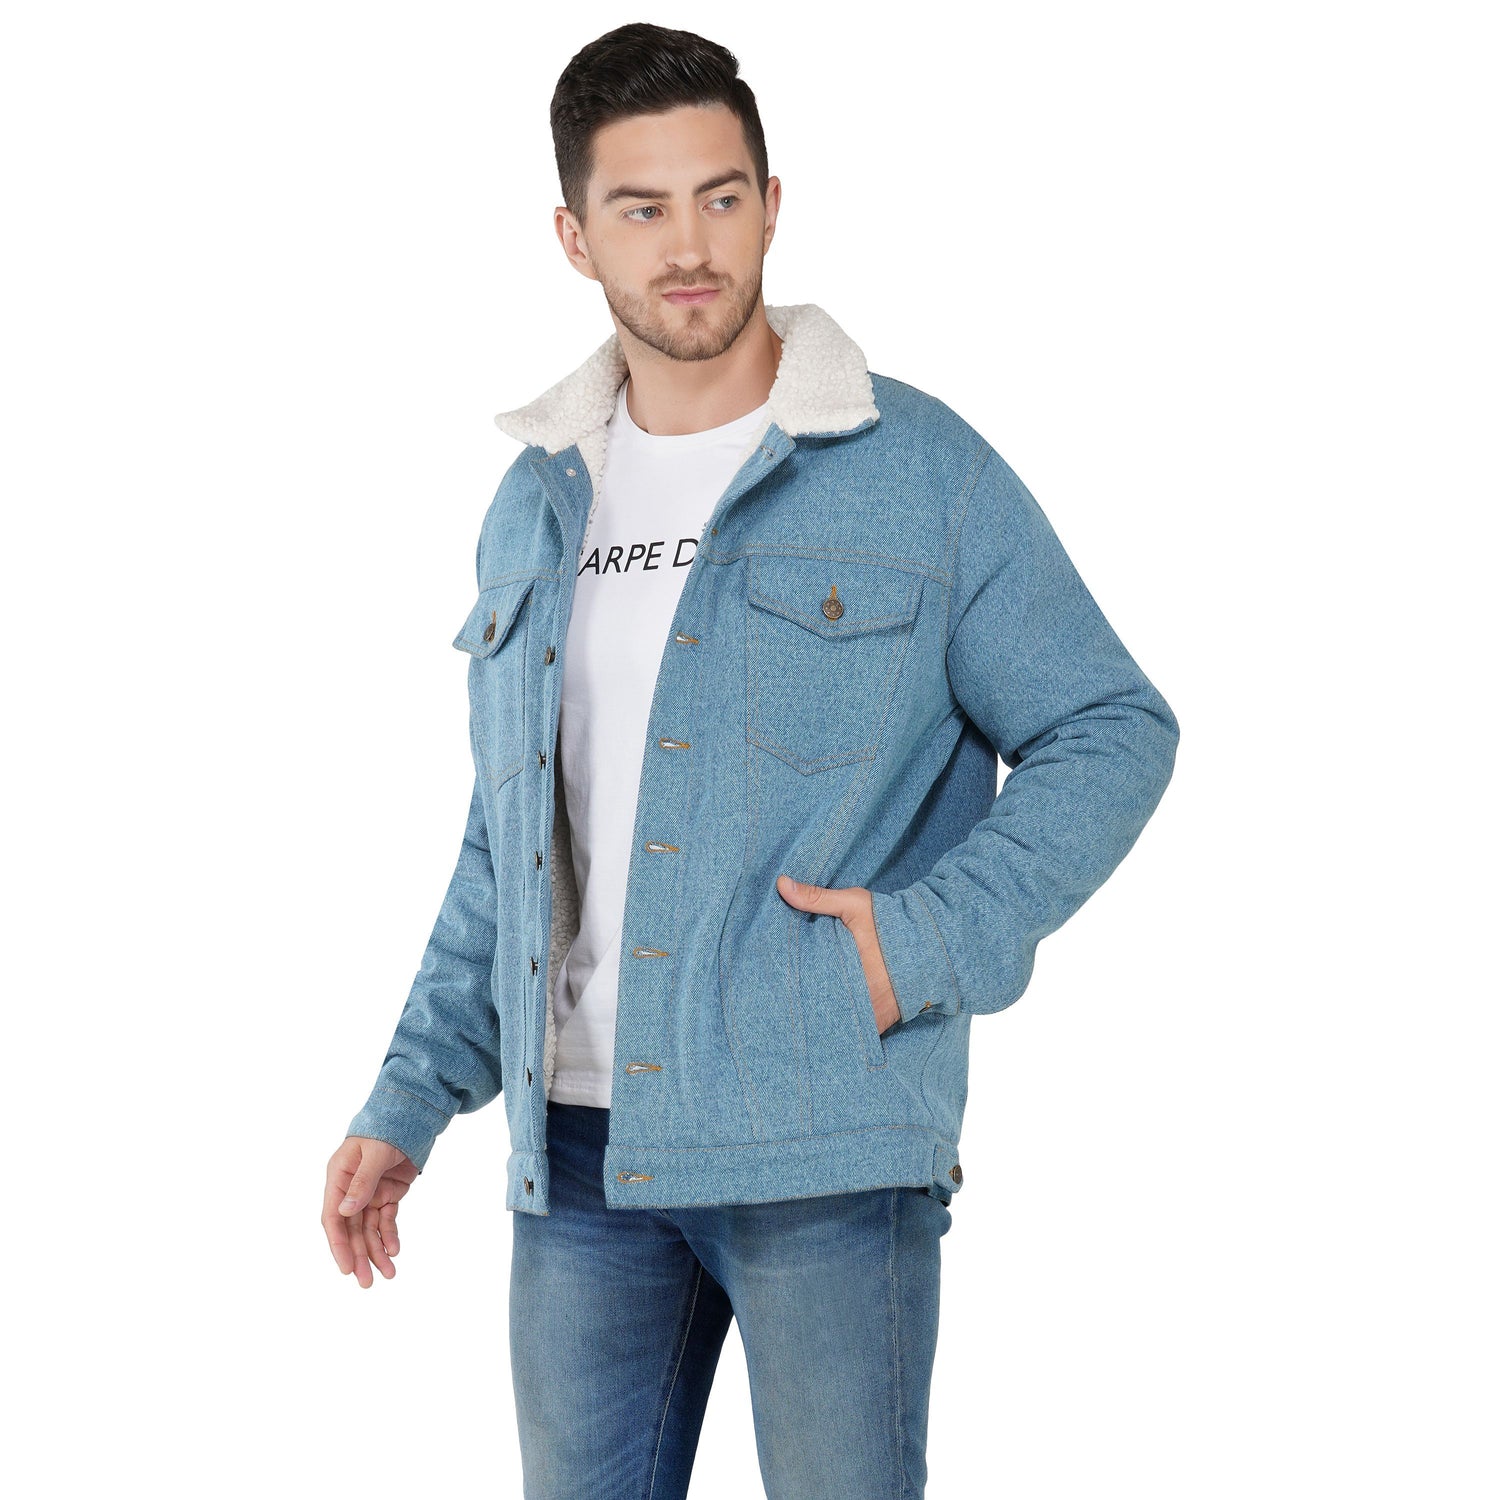 SLAY. Men's Full Sleeves Blue Solid Embroidered Button-Down Washed Light Blue Denim Jacket with Faux-fur Lining-clothing-to-slay.myshopify.com-Jacket